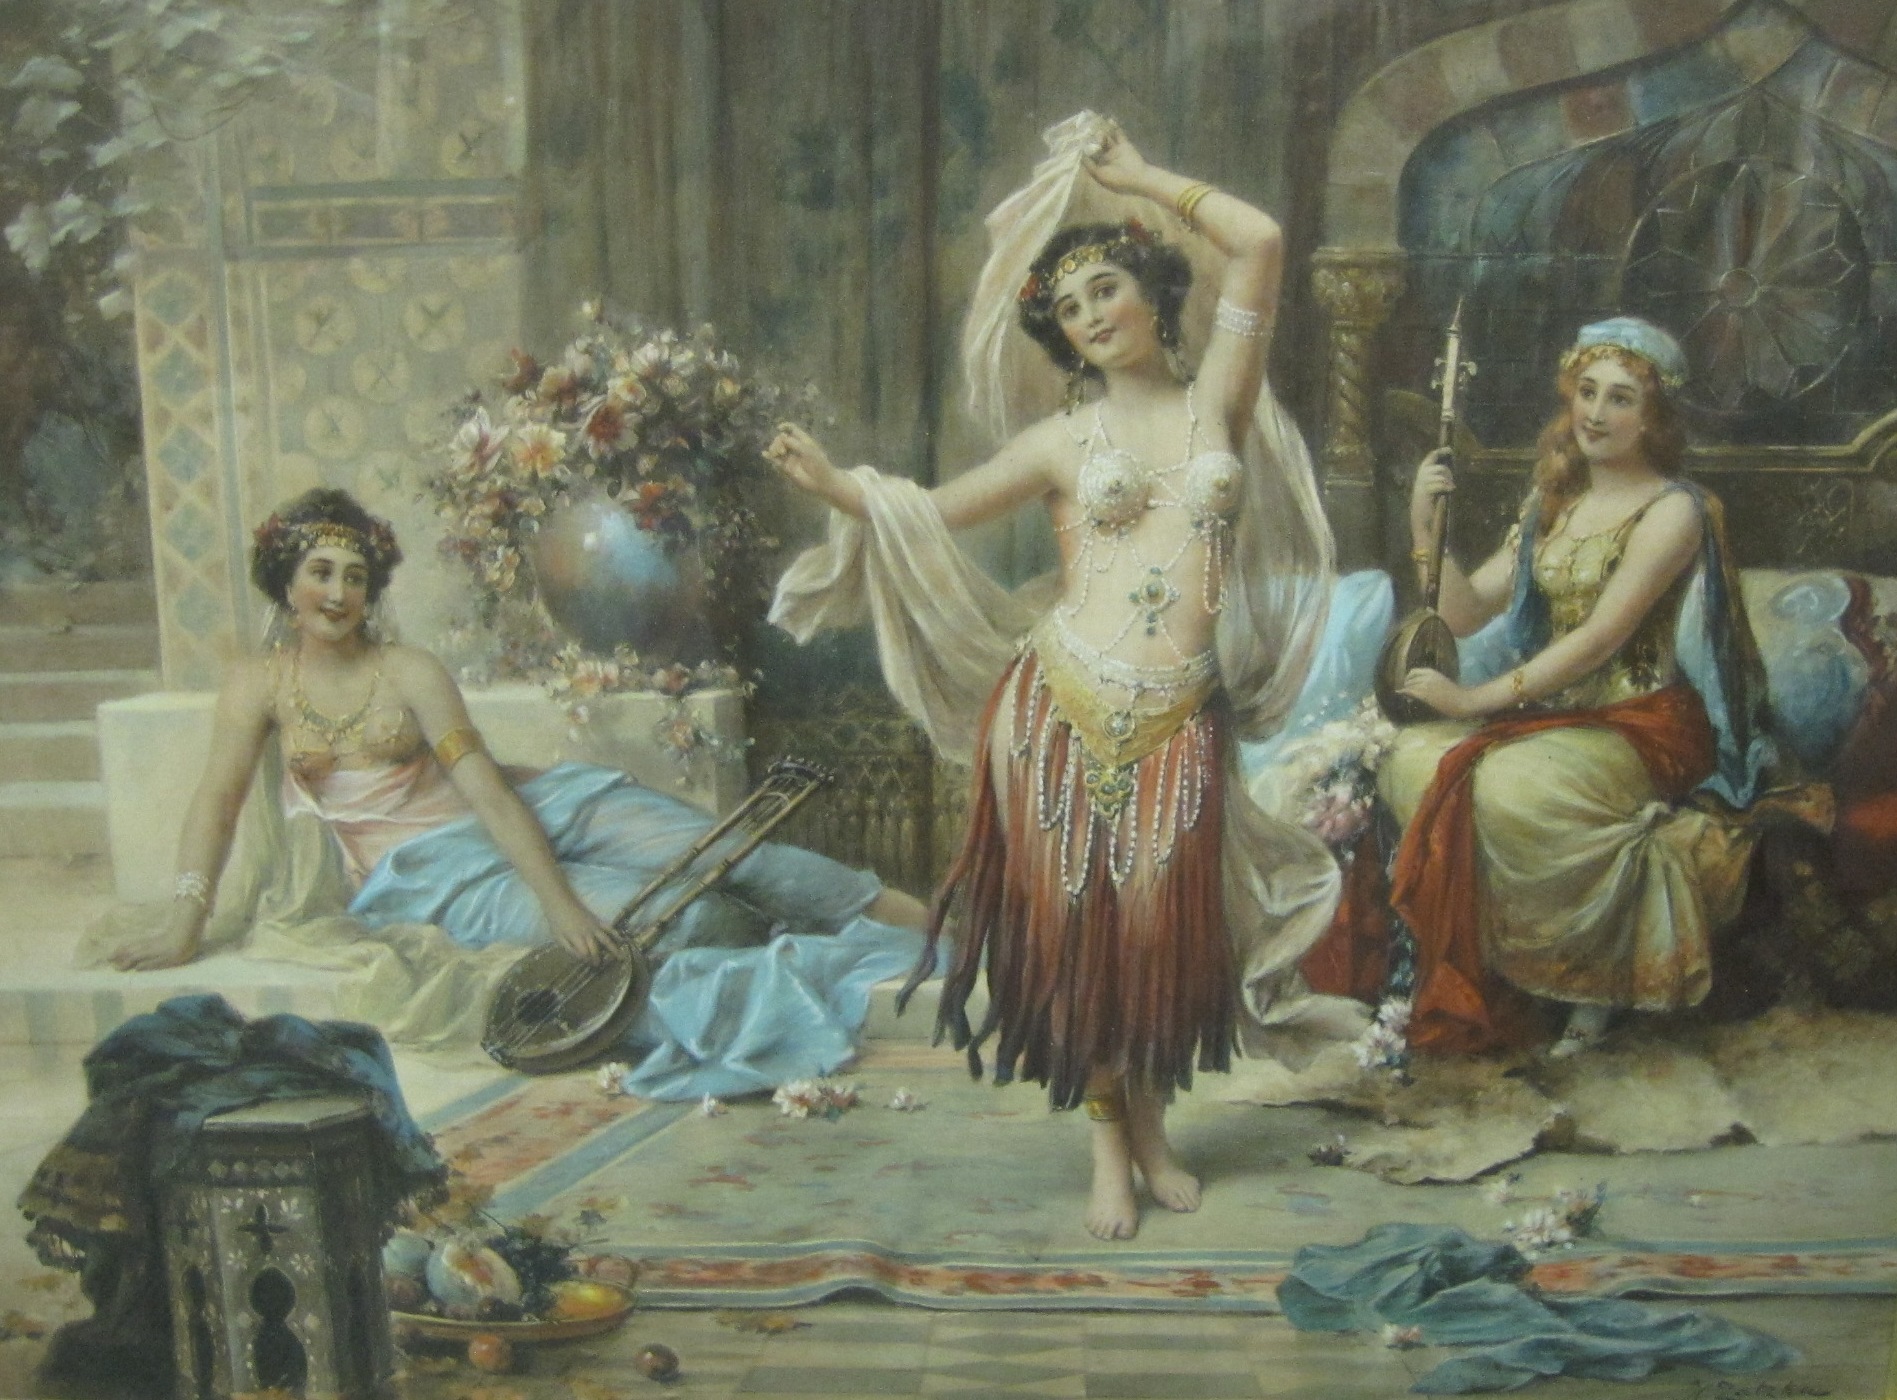 AFTER HANS ZAPKA. ‘Pride of the Harem’, chromolithograph, 16 1/2 x 22 1/2 in